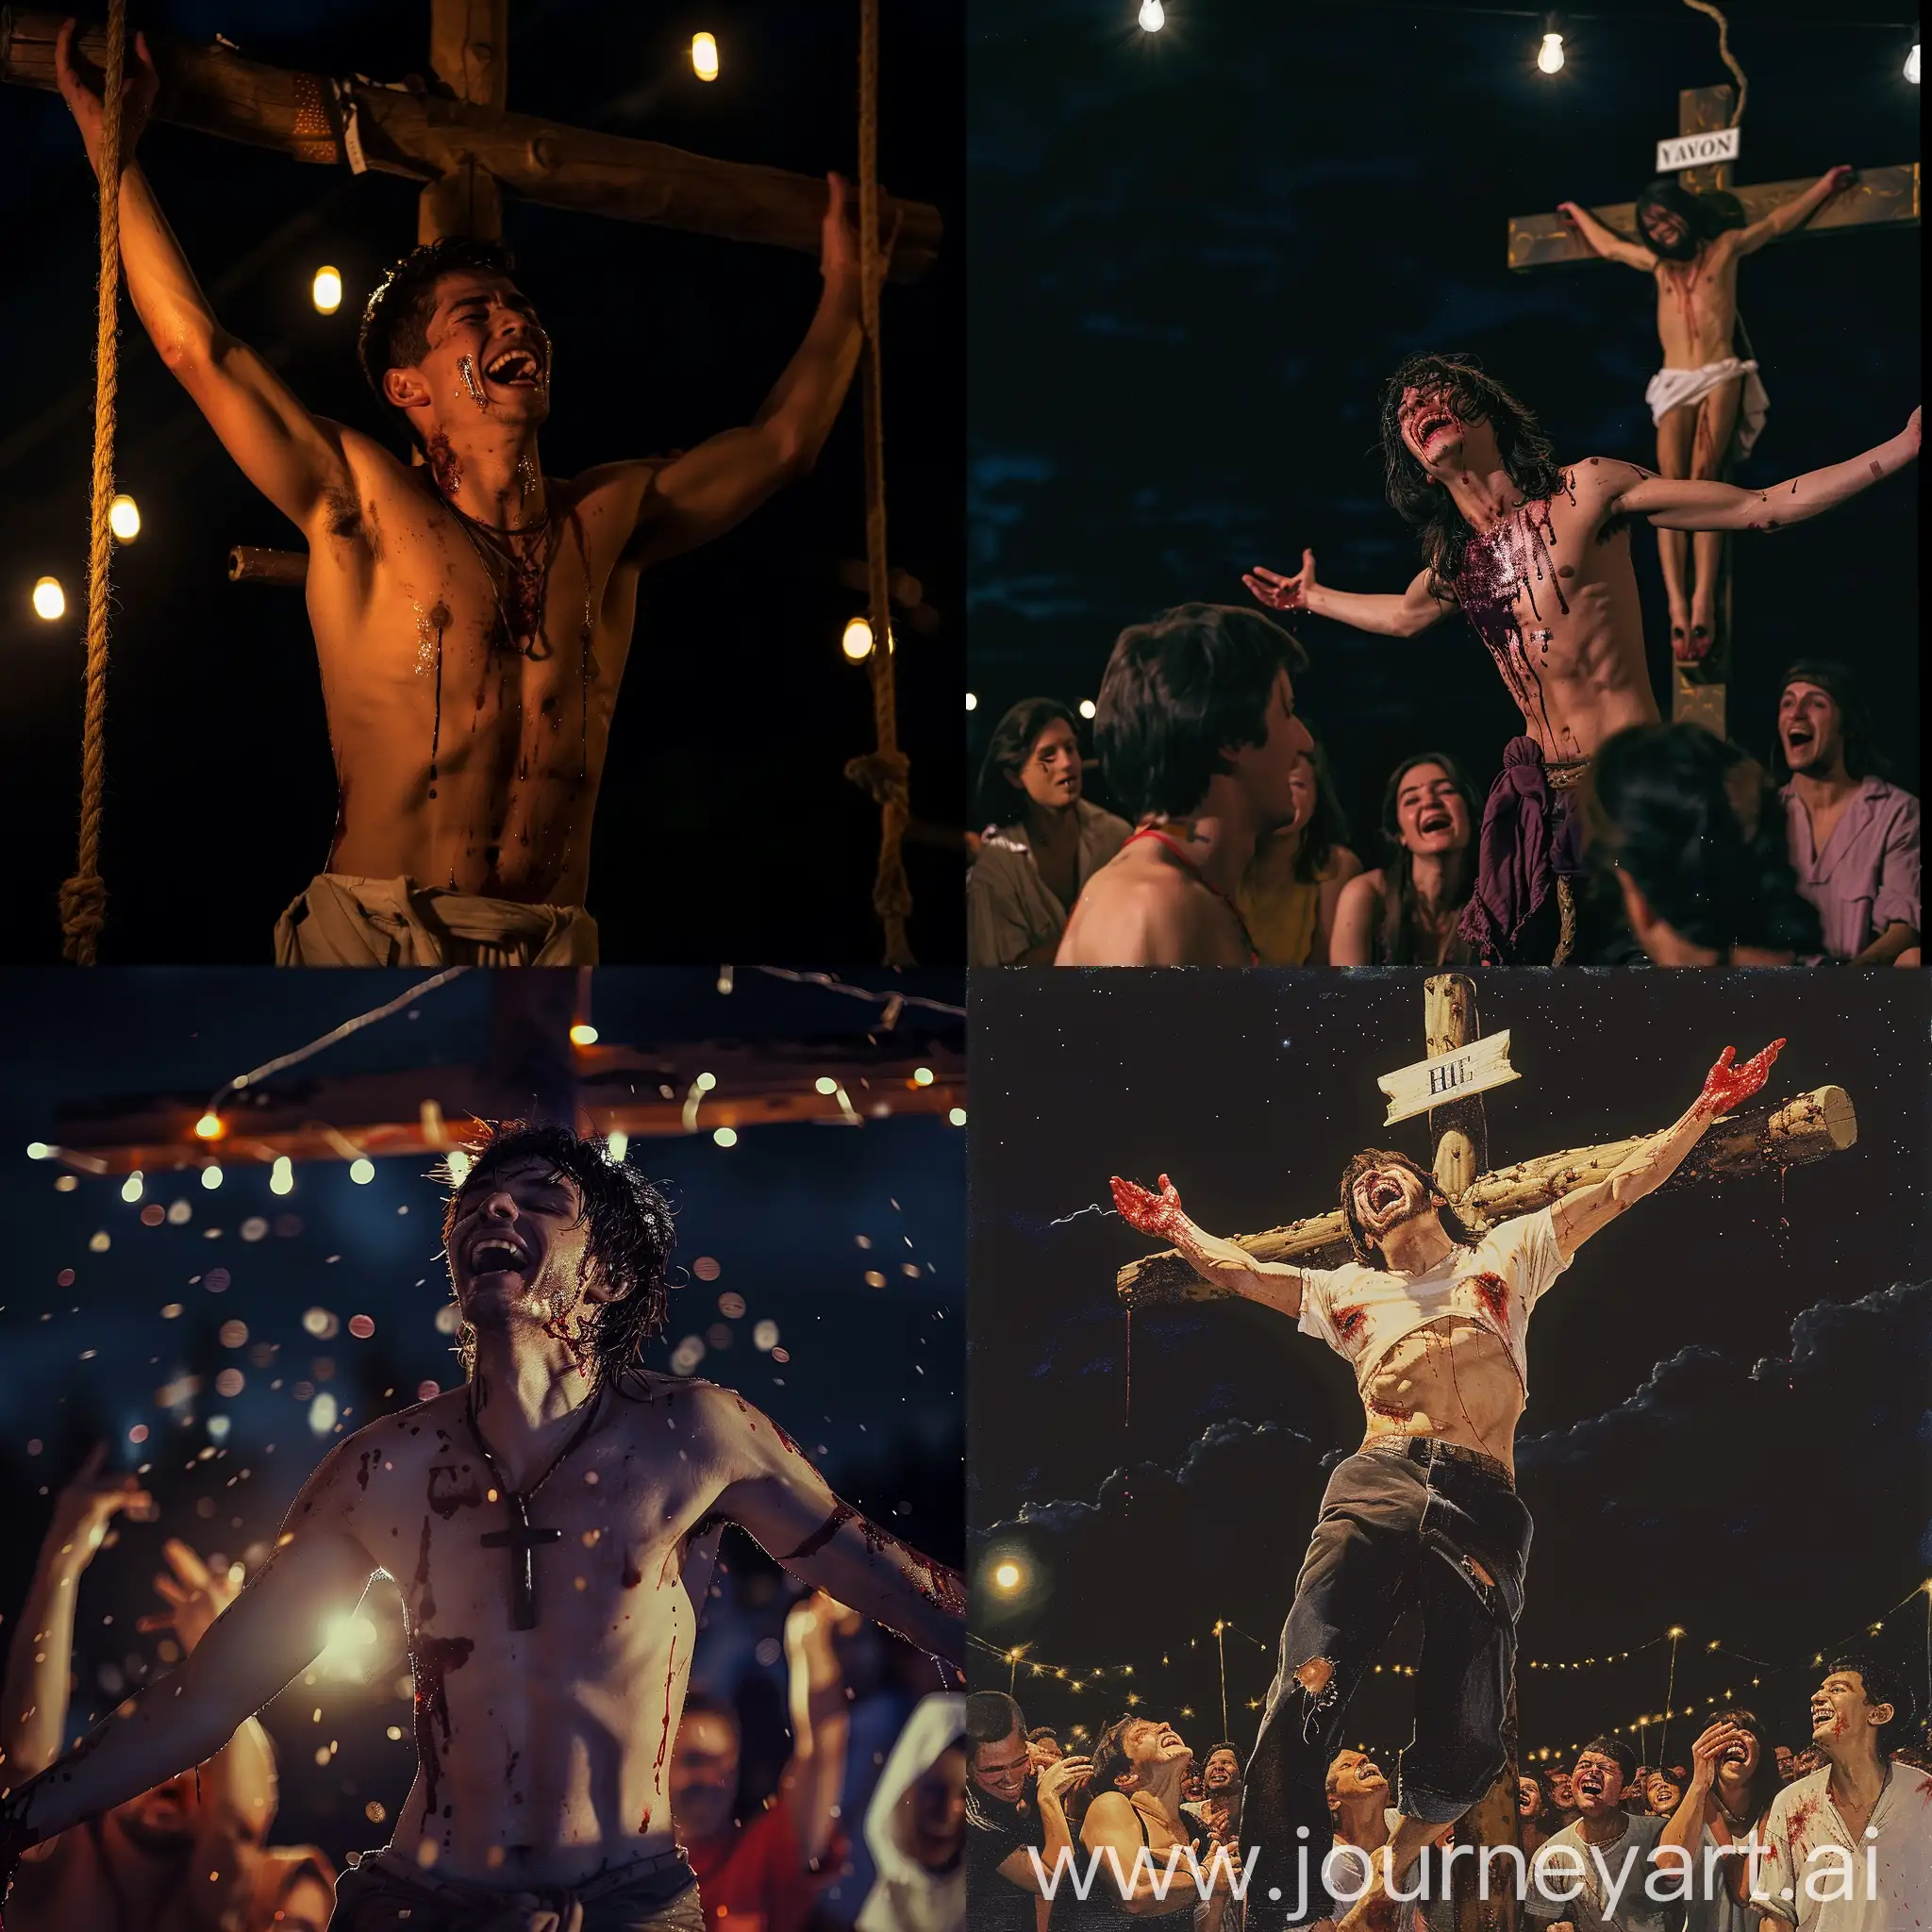 Night-Crucifixion-Scene-Young-Man-on-Cross-of-Jesus-Mocked-by-World